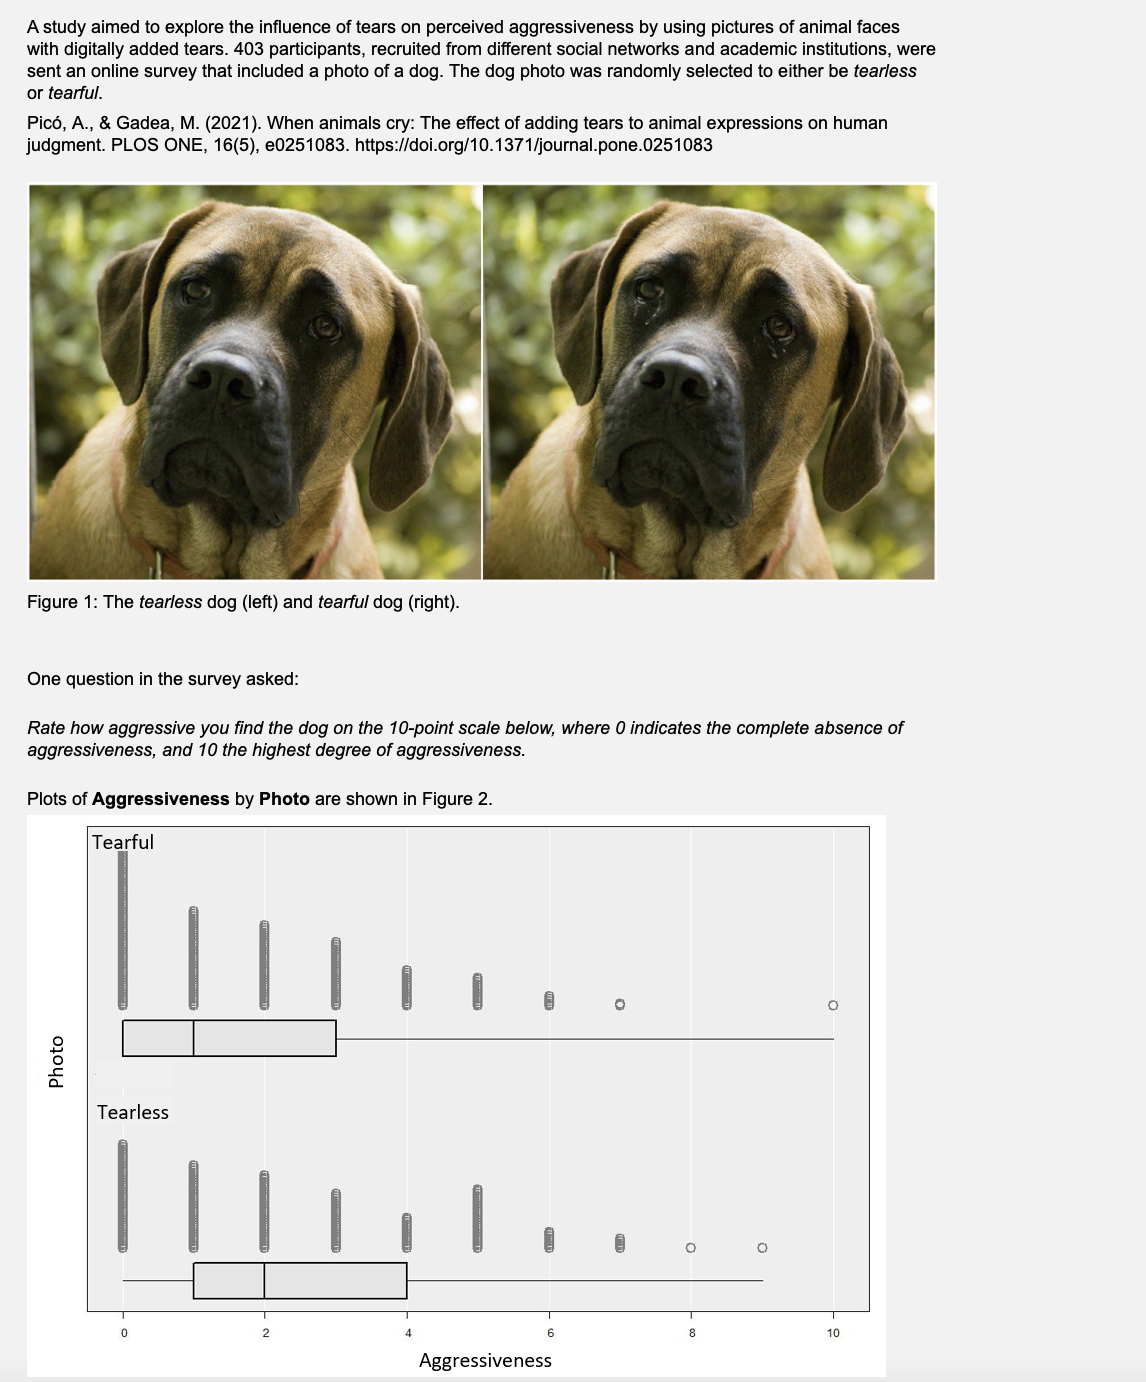 A study aimed to explore the influence of tears on perceived aggressiveness by using pictures of animal faces
with digitally added tears. 403 participants, recruited from different social networks and academic institutions, were
sent an online survey that included a photo of a dog. The dog photo was randomly selected to either be tearless
or tearful.
Picó, A., & Gadea, M. (2021). When animals cry: The effect of adding tears to animal expressions on human
judgment. PLOS ONE, 16(5), e0251083. https://doi.org/10.1371/journal.pone.0251083
Figure 1: The tearless dog (left) and tearful dog (right).
One question in the survey asked:
Rate how aggressive you find the dog on the 10-point scale below, where 0 indicates the complete absence of
aggressiveness, and 10 the highest degree of aggressiveness.
Plots of Aggressiveness by Photo are shown in Figure 2.
Photo
Tearful
Tearless
0
Aggressiveness
O
O
O
O
10